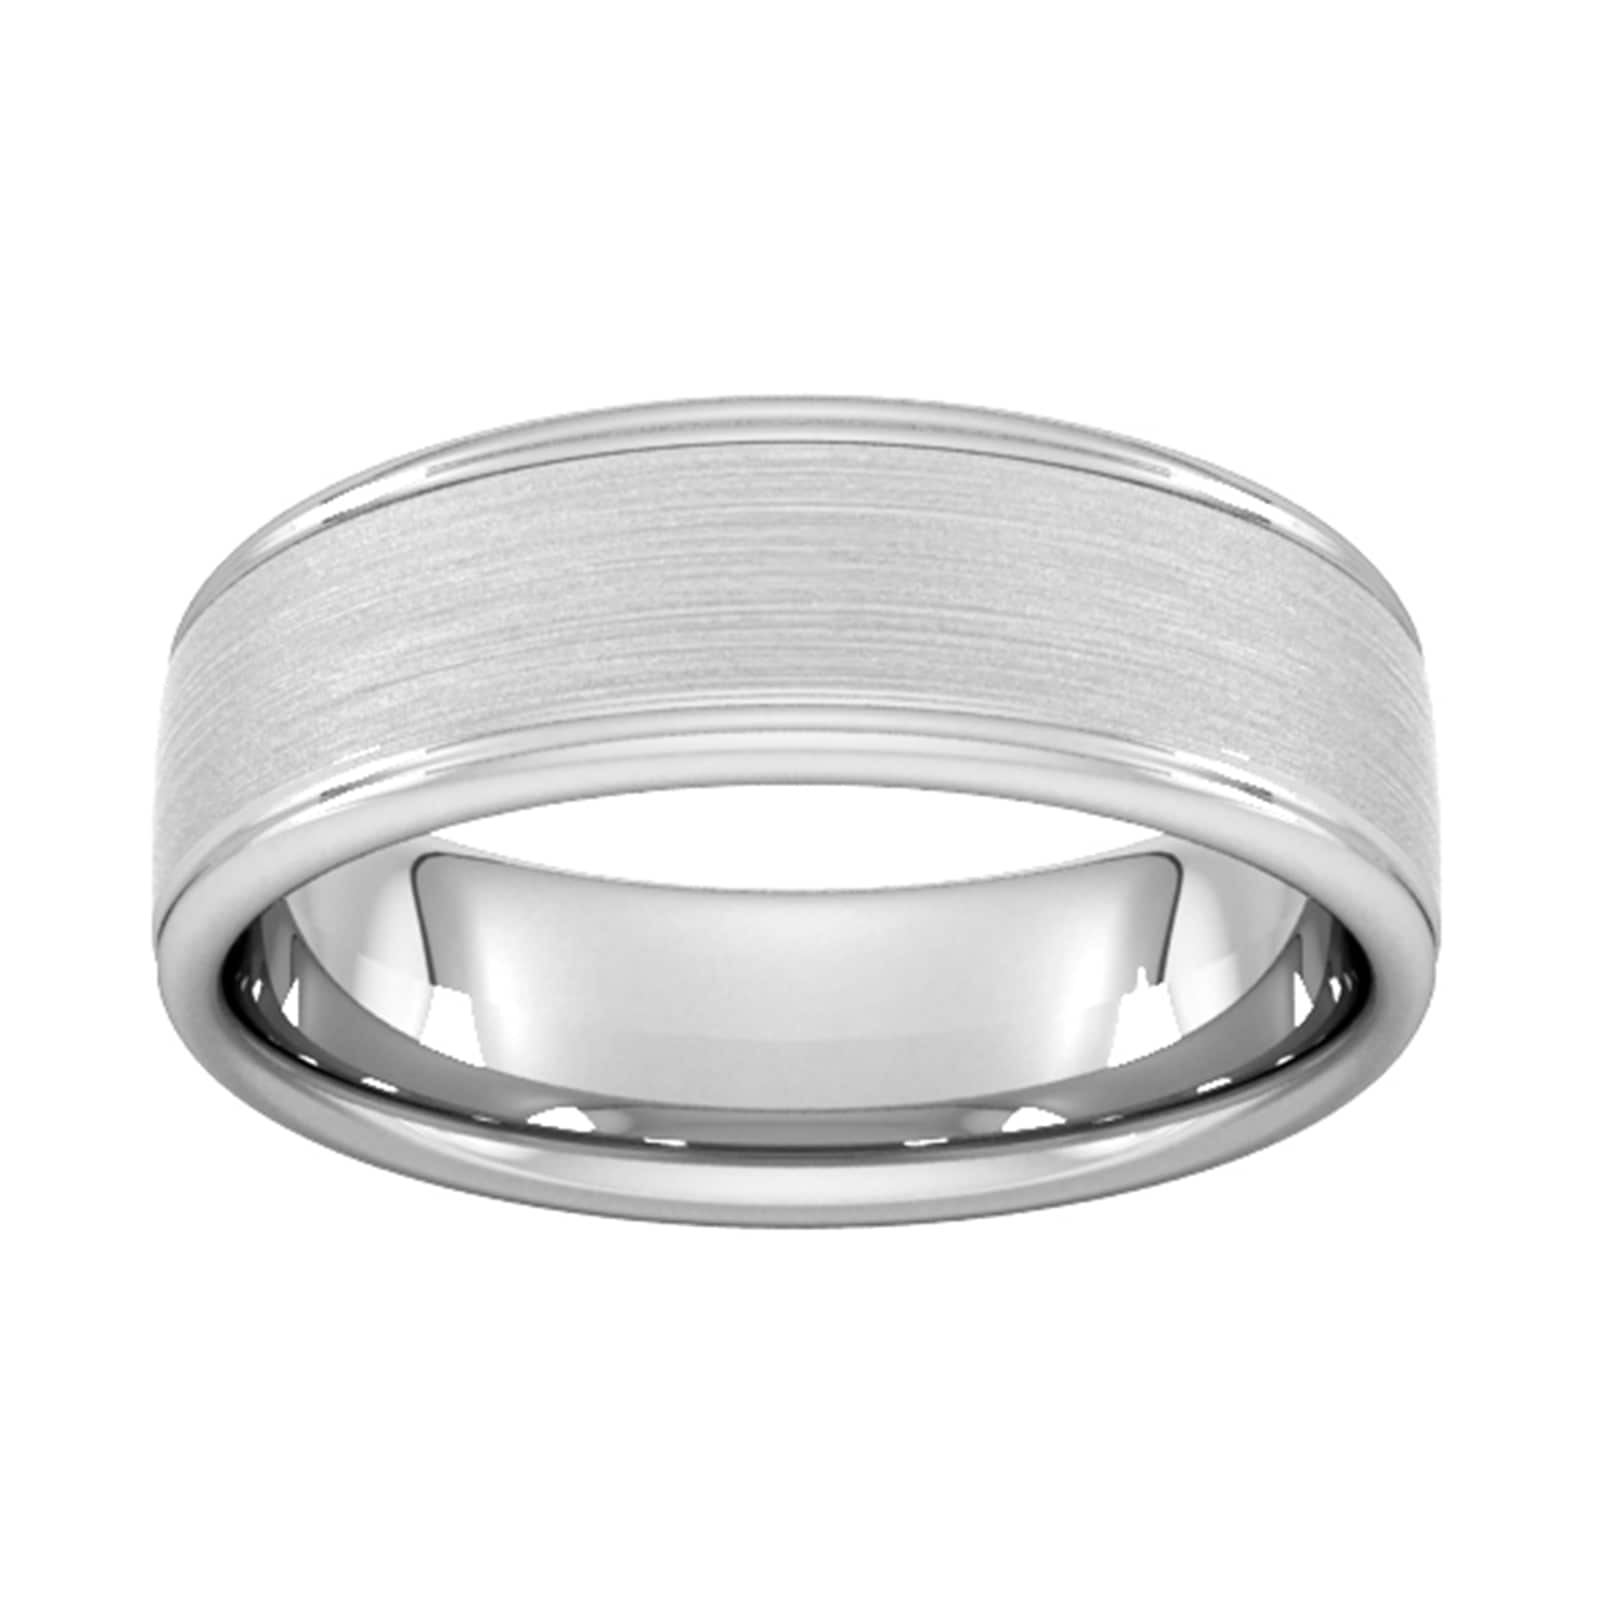 7mm Slight Court Heavy Matt Centre With Grooves Wedding Ring In 18 Carat White Gold - Ring Size H